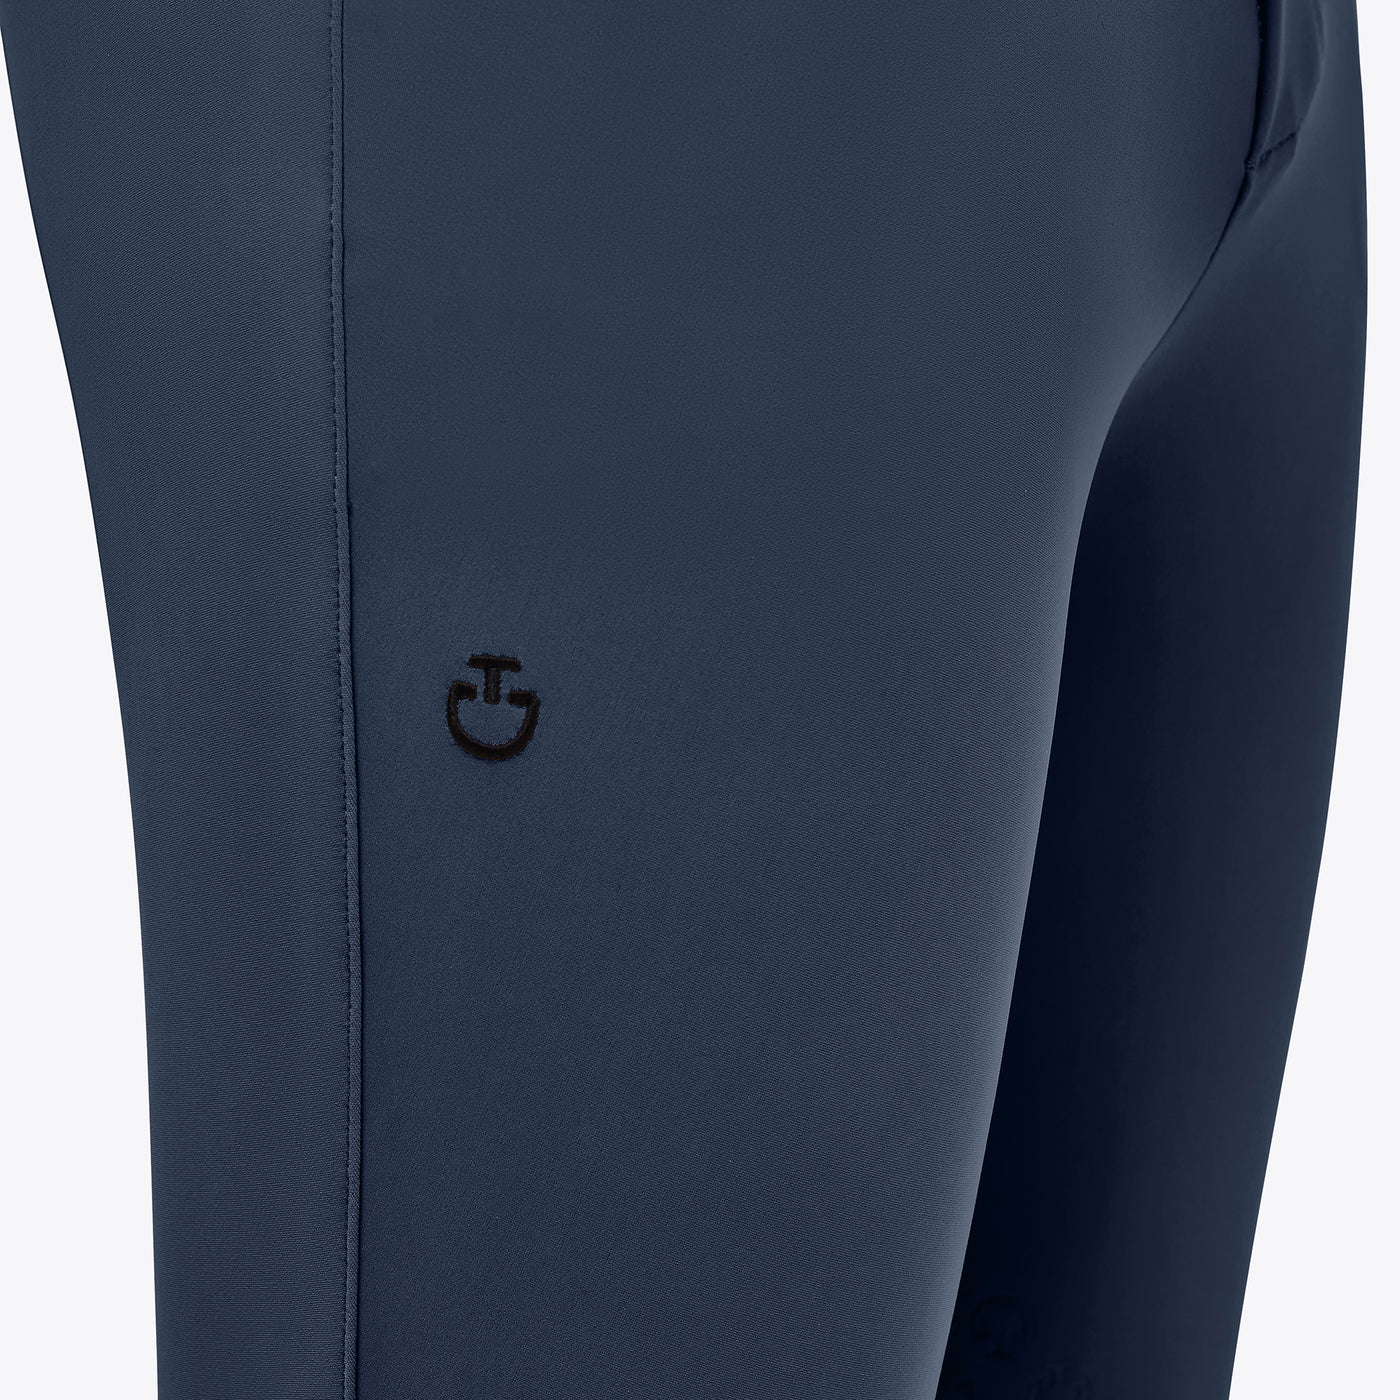 New Grip System breeches